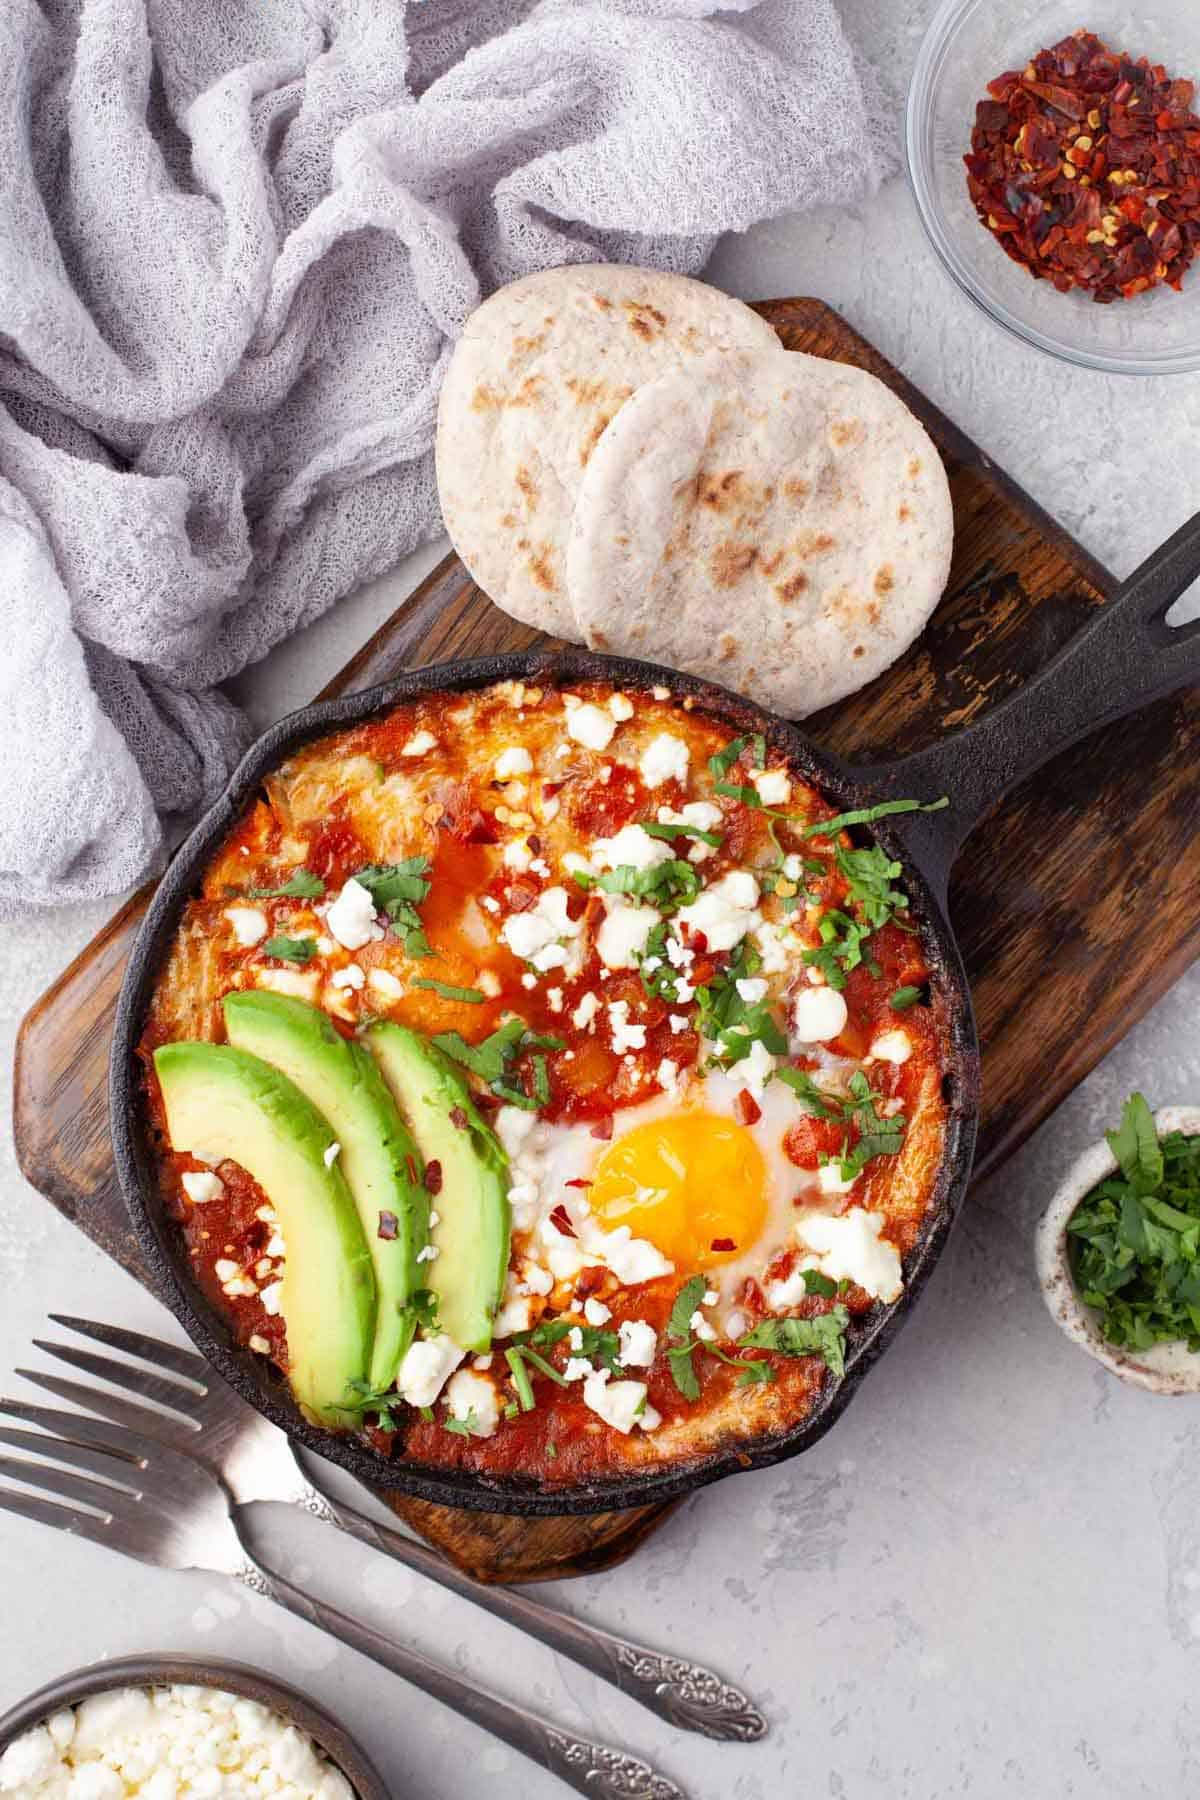 Shakshuka in a cast iron skillet set on a wooden board with pita and spices.